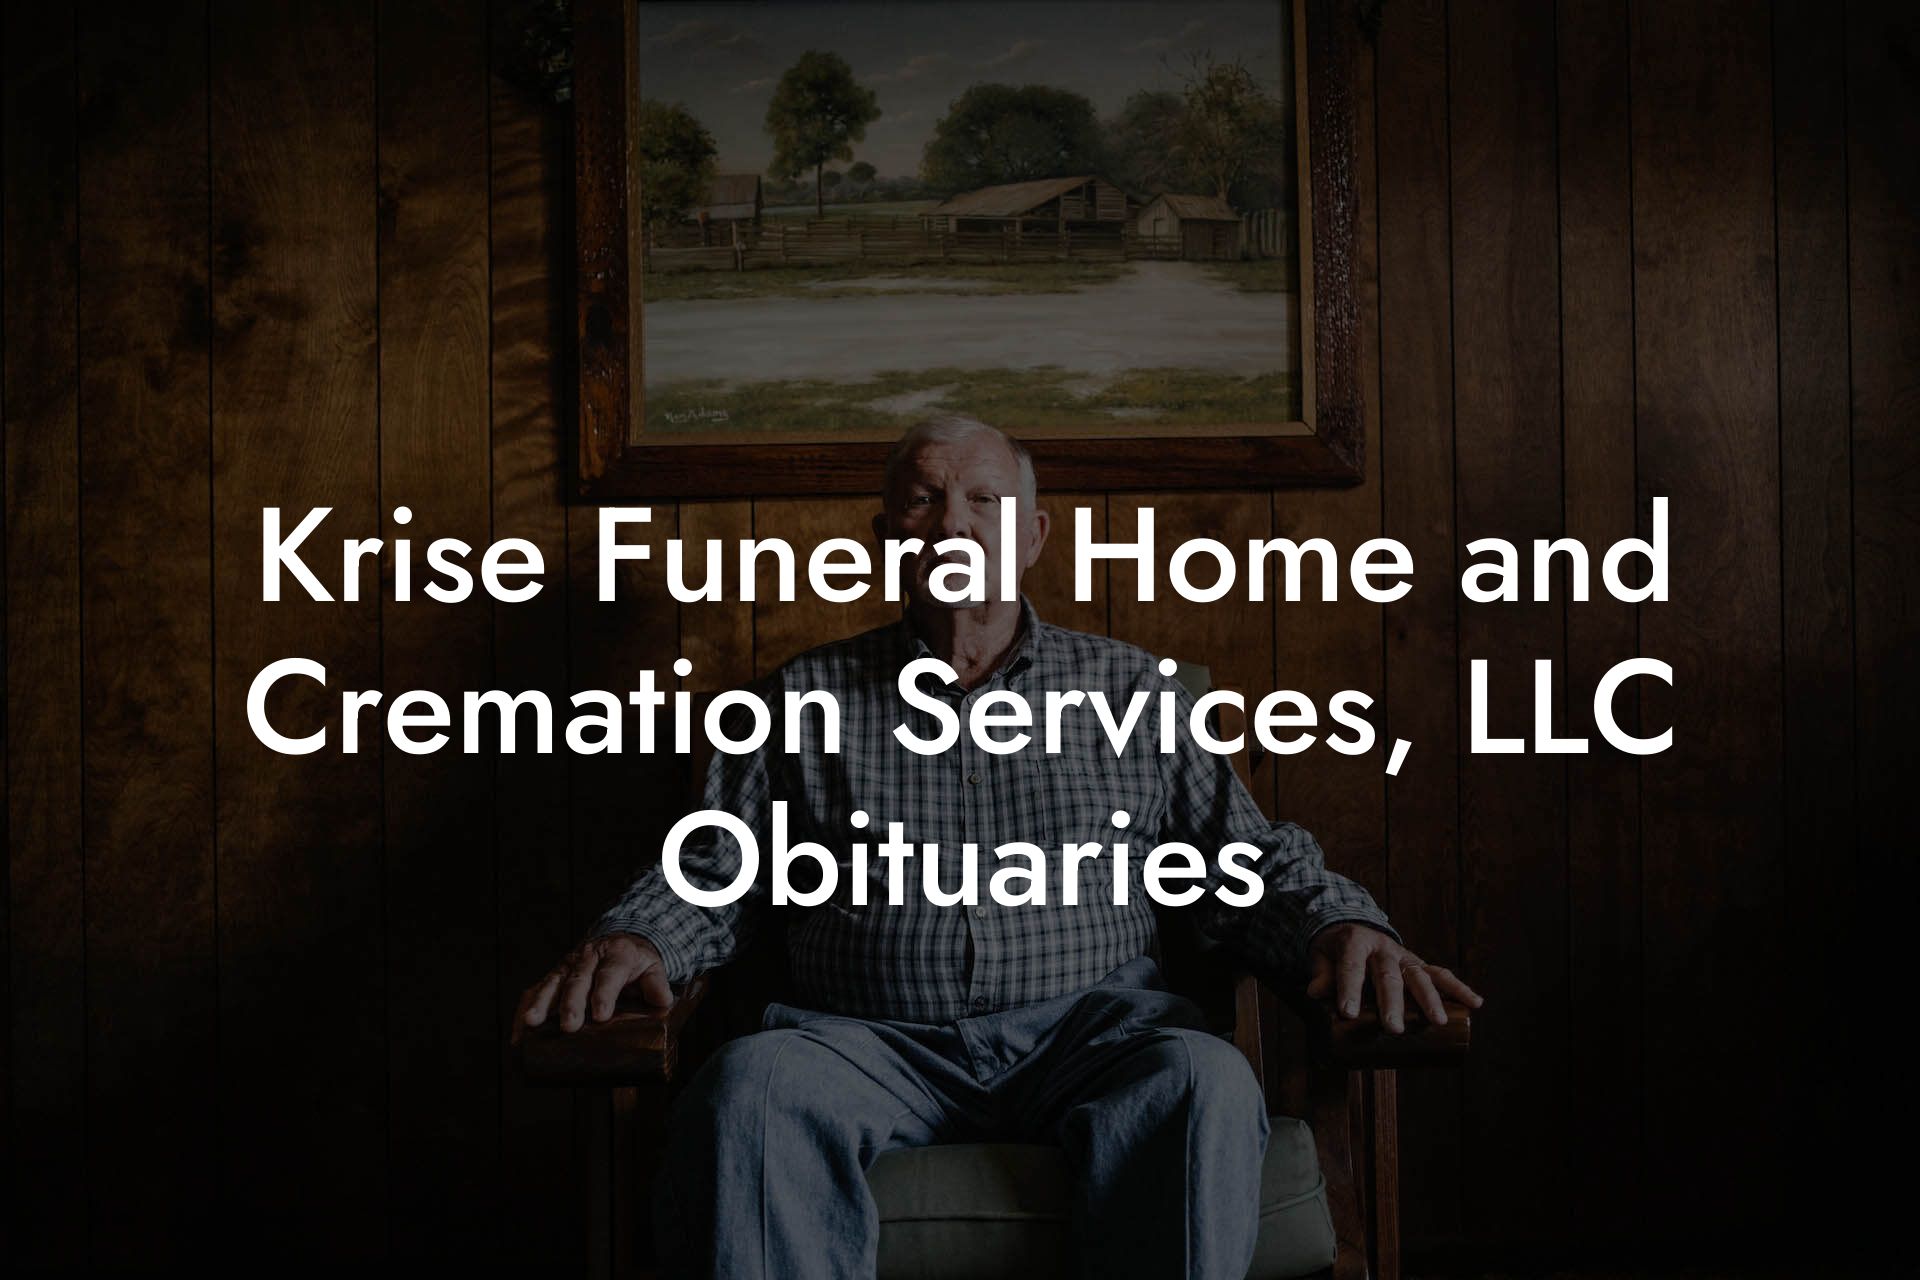 Krise Funeral Home and Cremation Services, LLC Obituaries